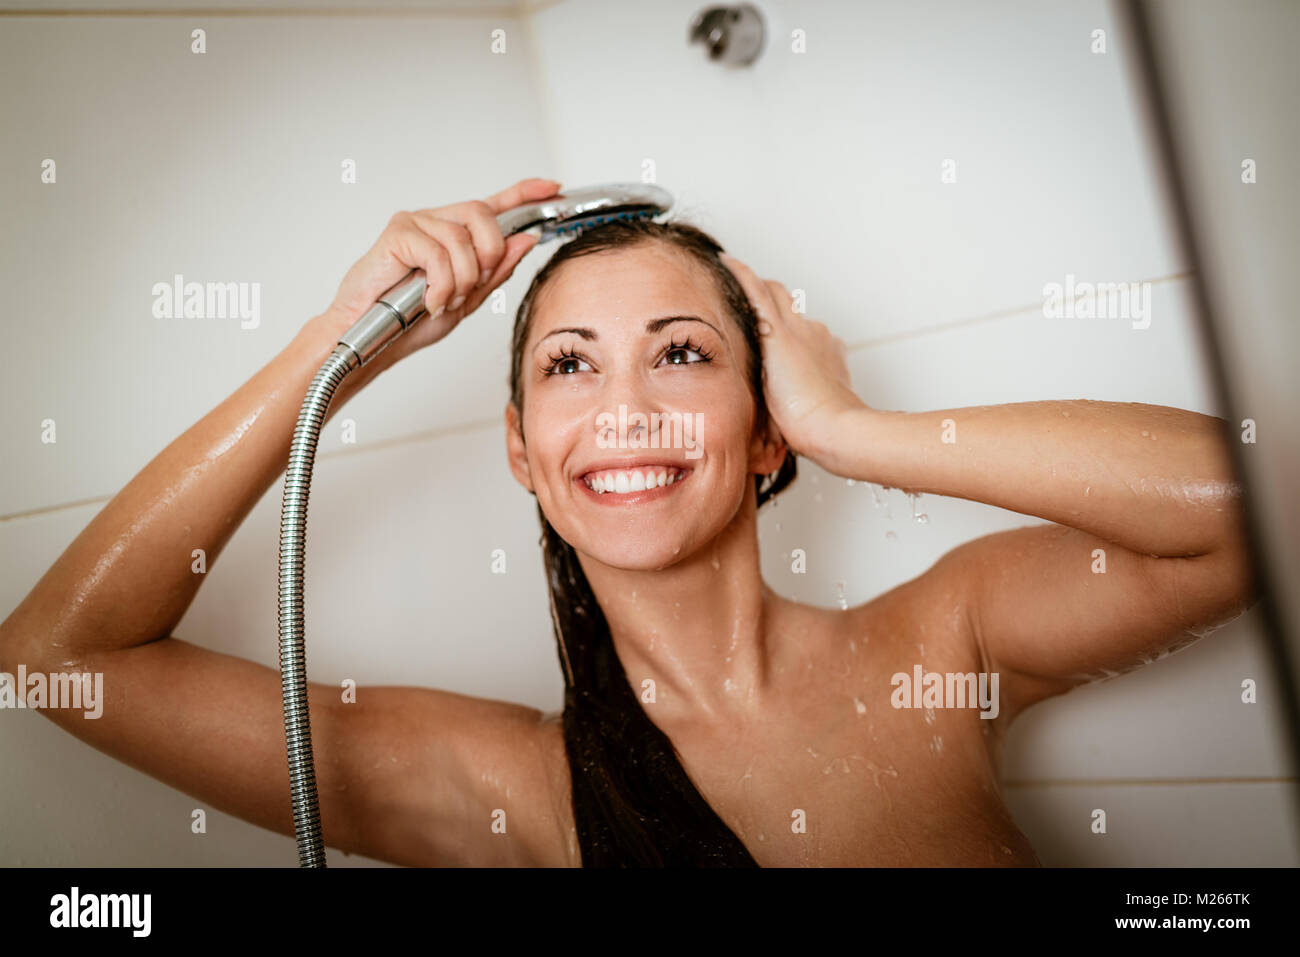 Happy young woman wetting her hair while showering under shower head. Stock Photo